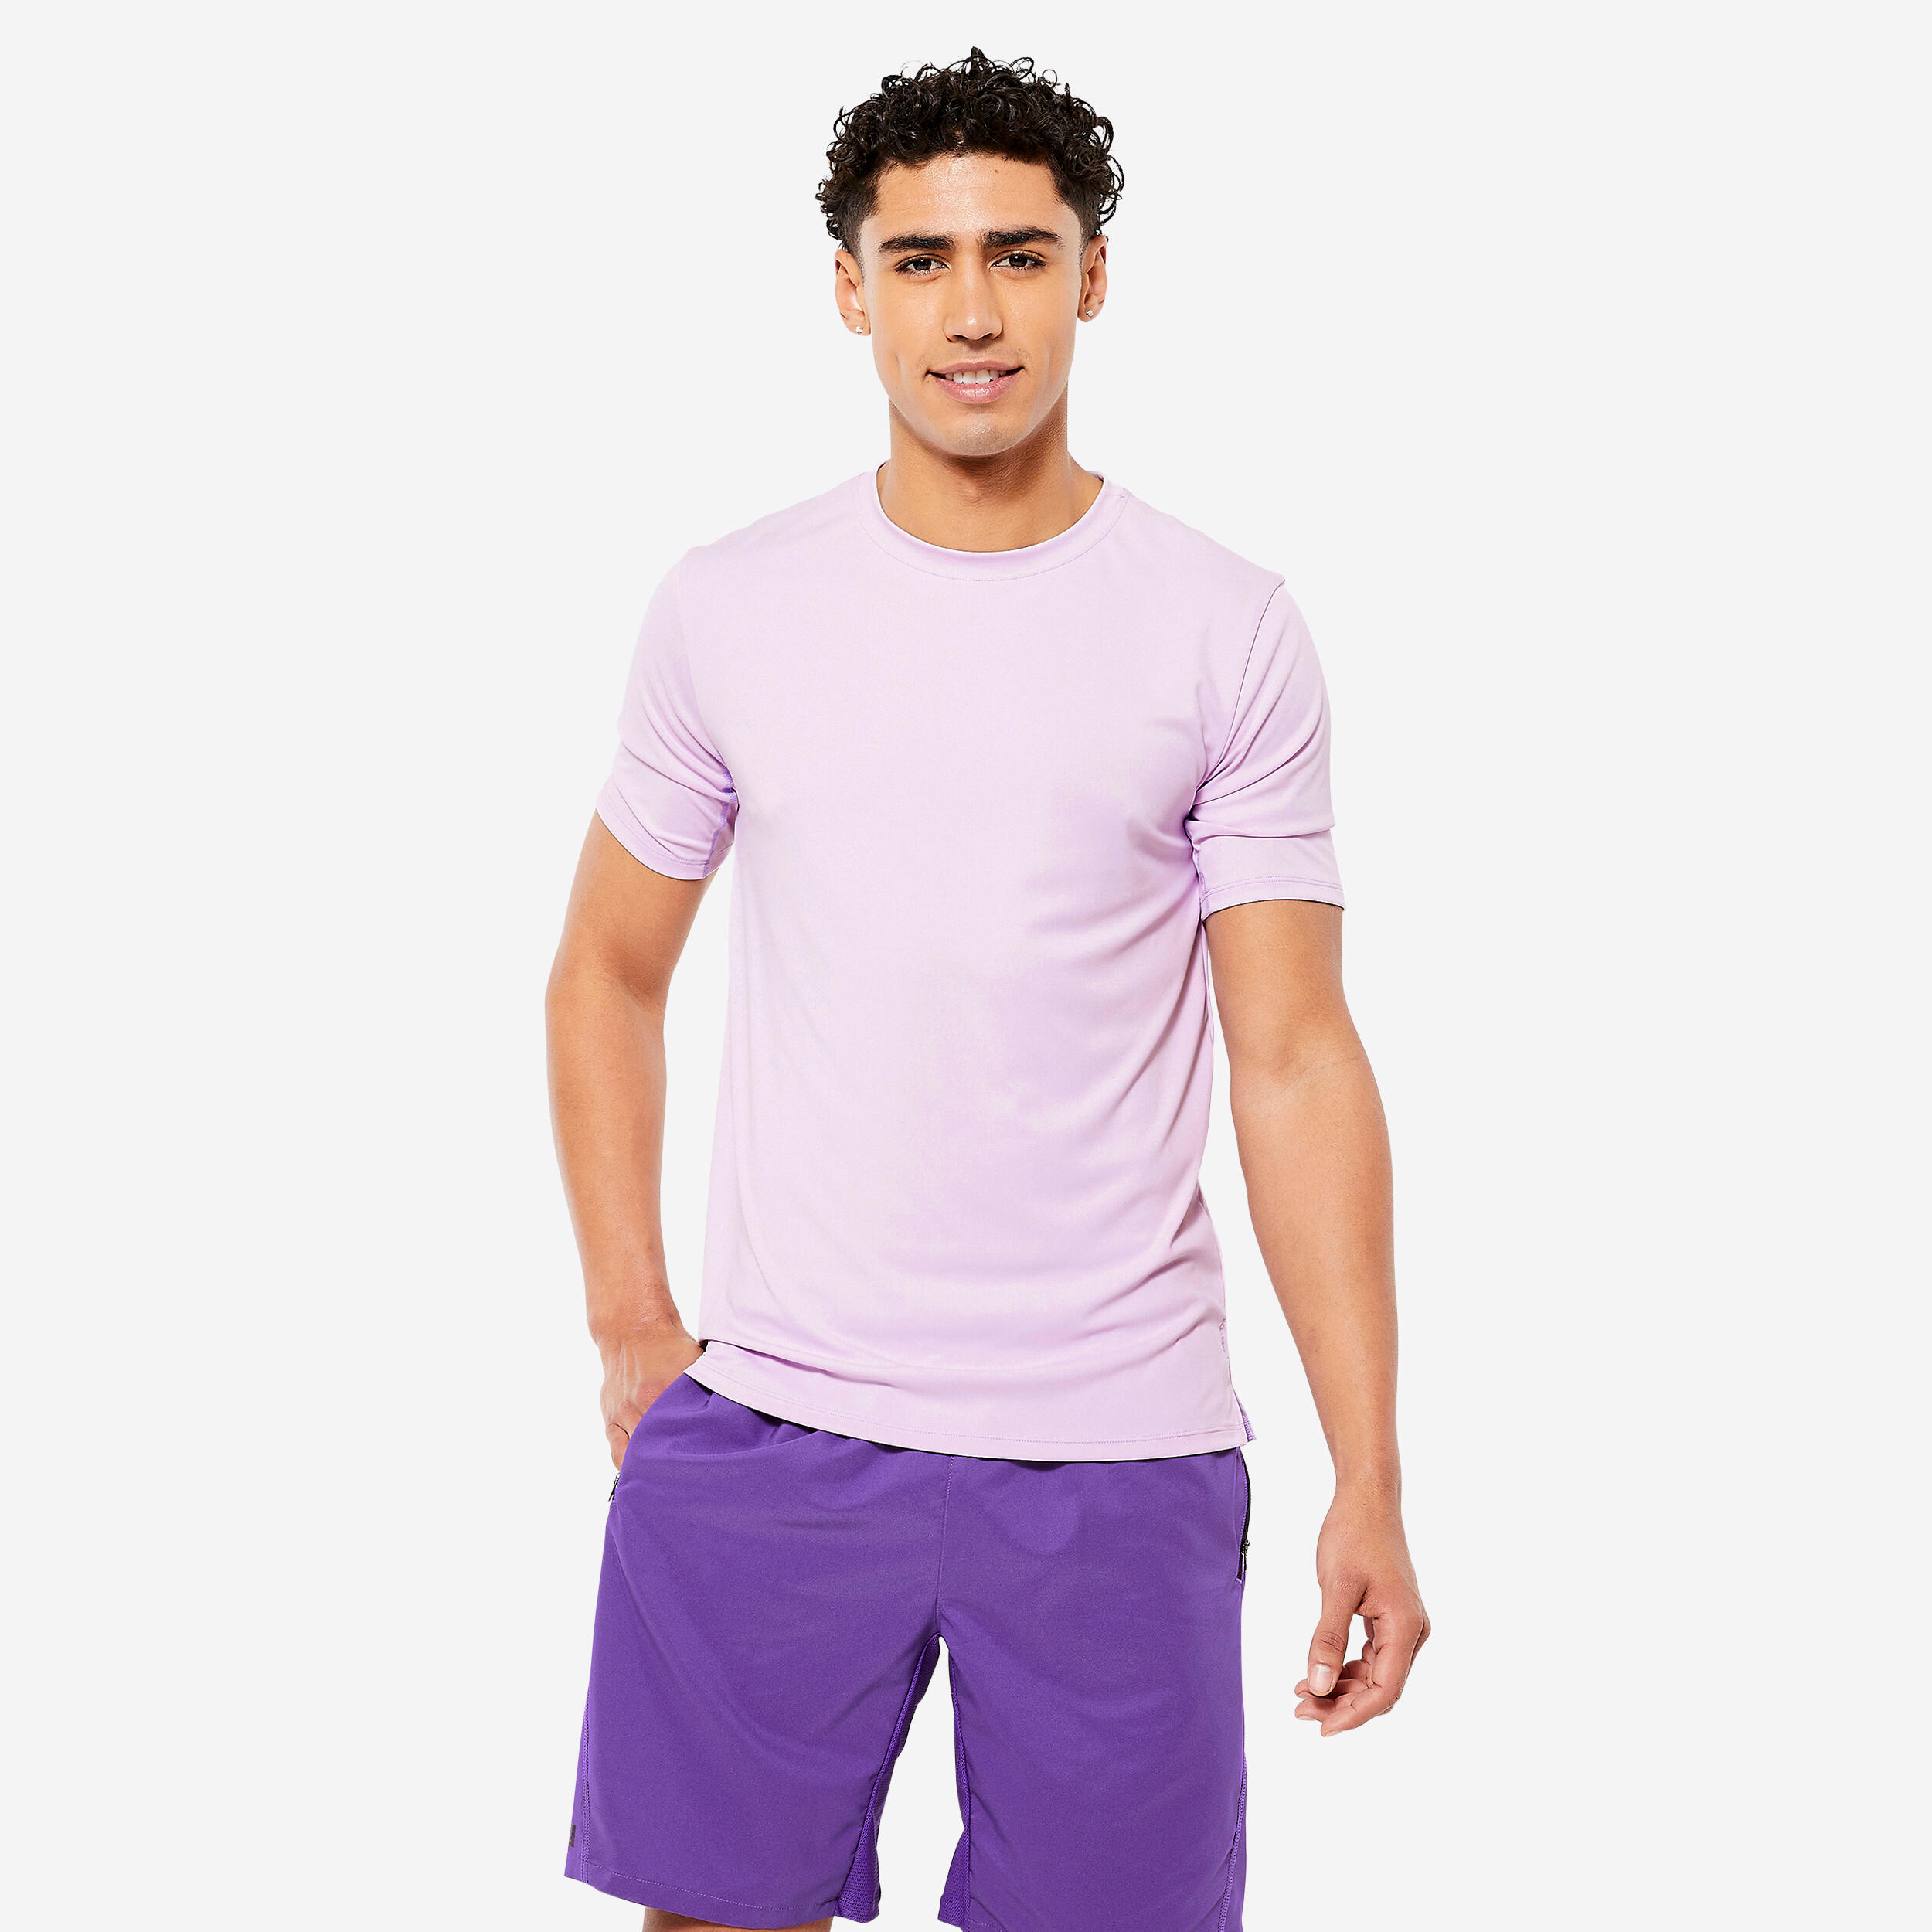 DOMYOS Men's Fitness Breathable Essential Short-Sleeved Crew Neck T-Shirt - Mauve